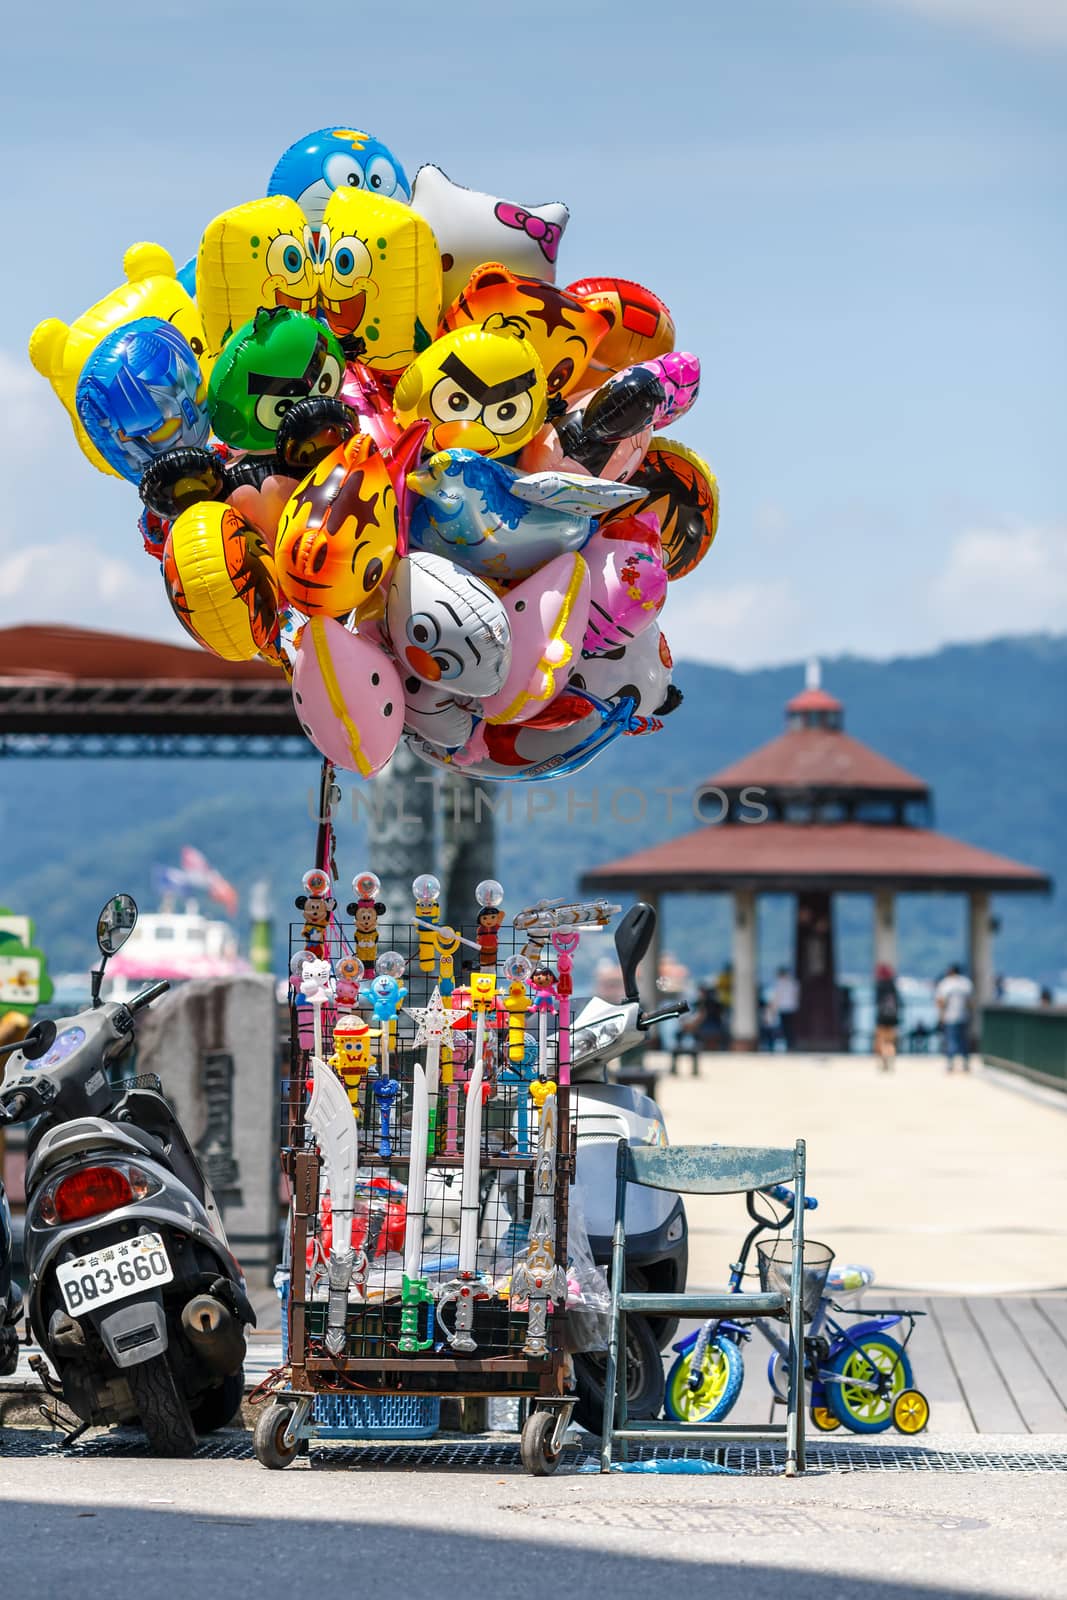 Colorful cartoon character balloon and kid toy hawker by street at Hop-On Hop-Off Boat pier in Sun Moon Lake, largest lake in Taiwan and tourist attraction.